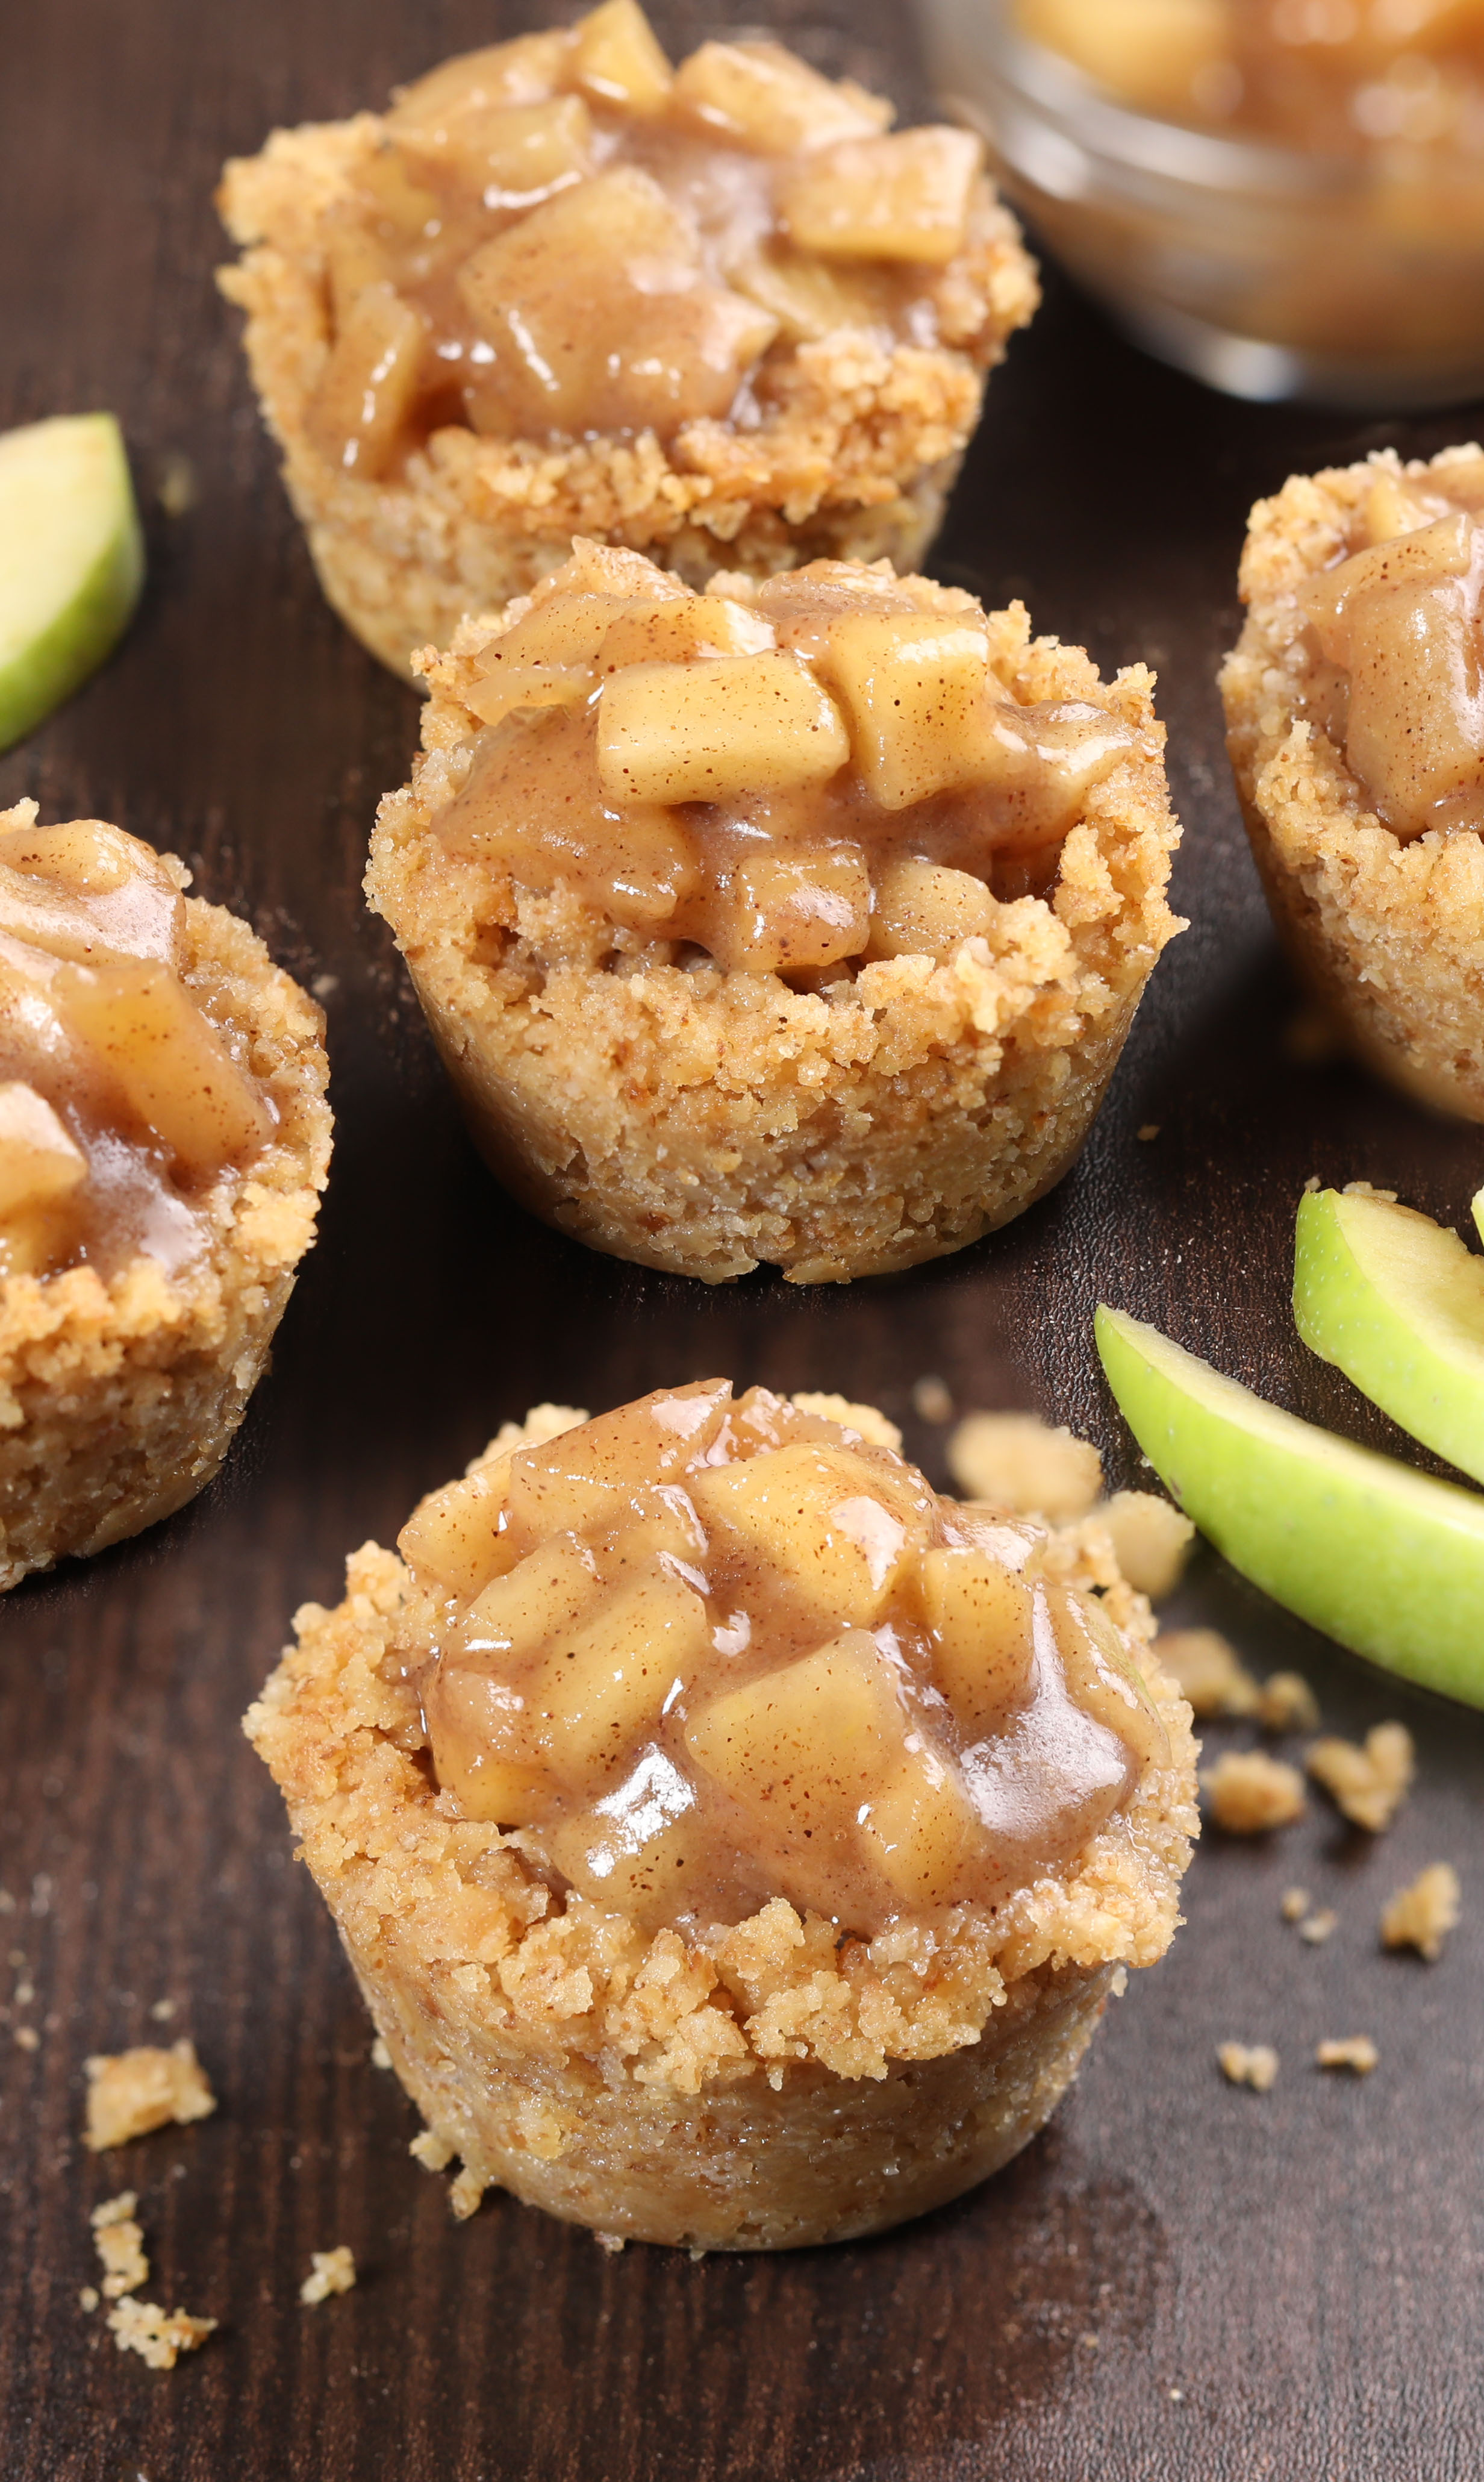 Apple Crisp Bites – A little bite of heaven! Crispy baked oatmeal cookie crust on the outside, soft apple pie on the inside! You’ll be enjoying this awesome dessert in about 30 minutes.